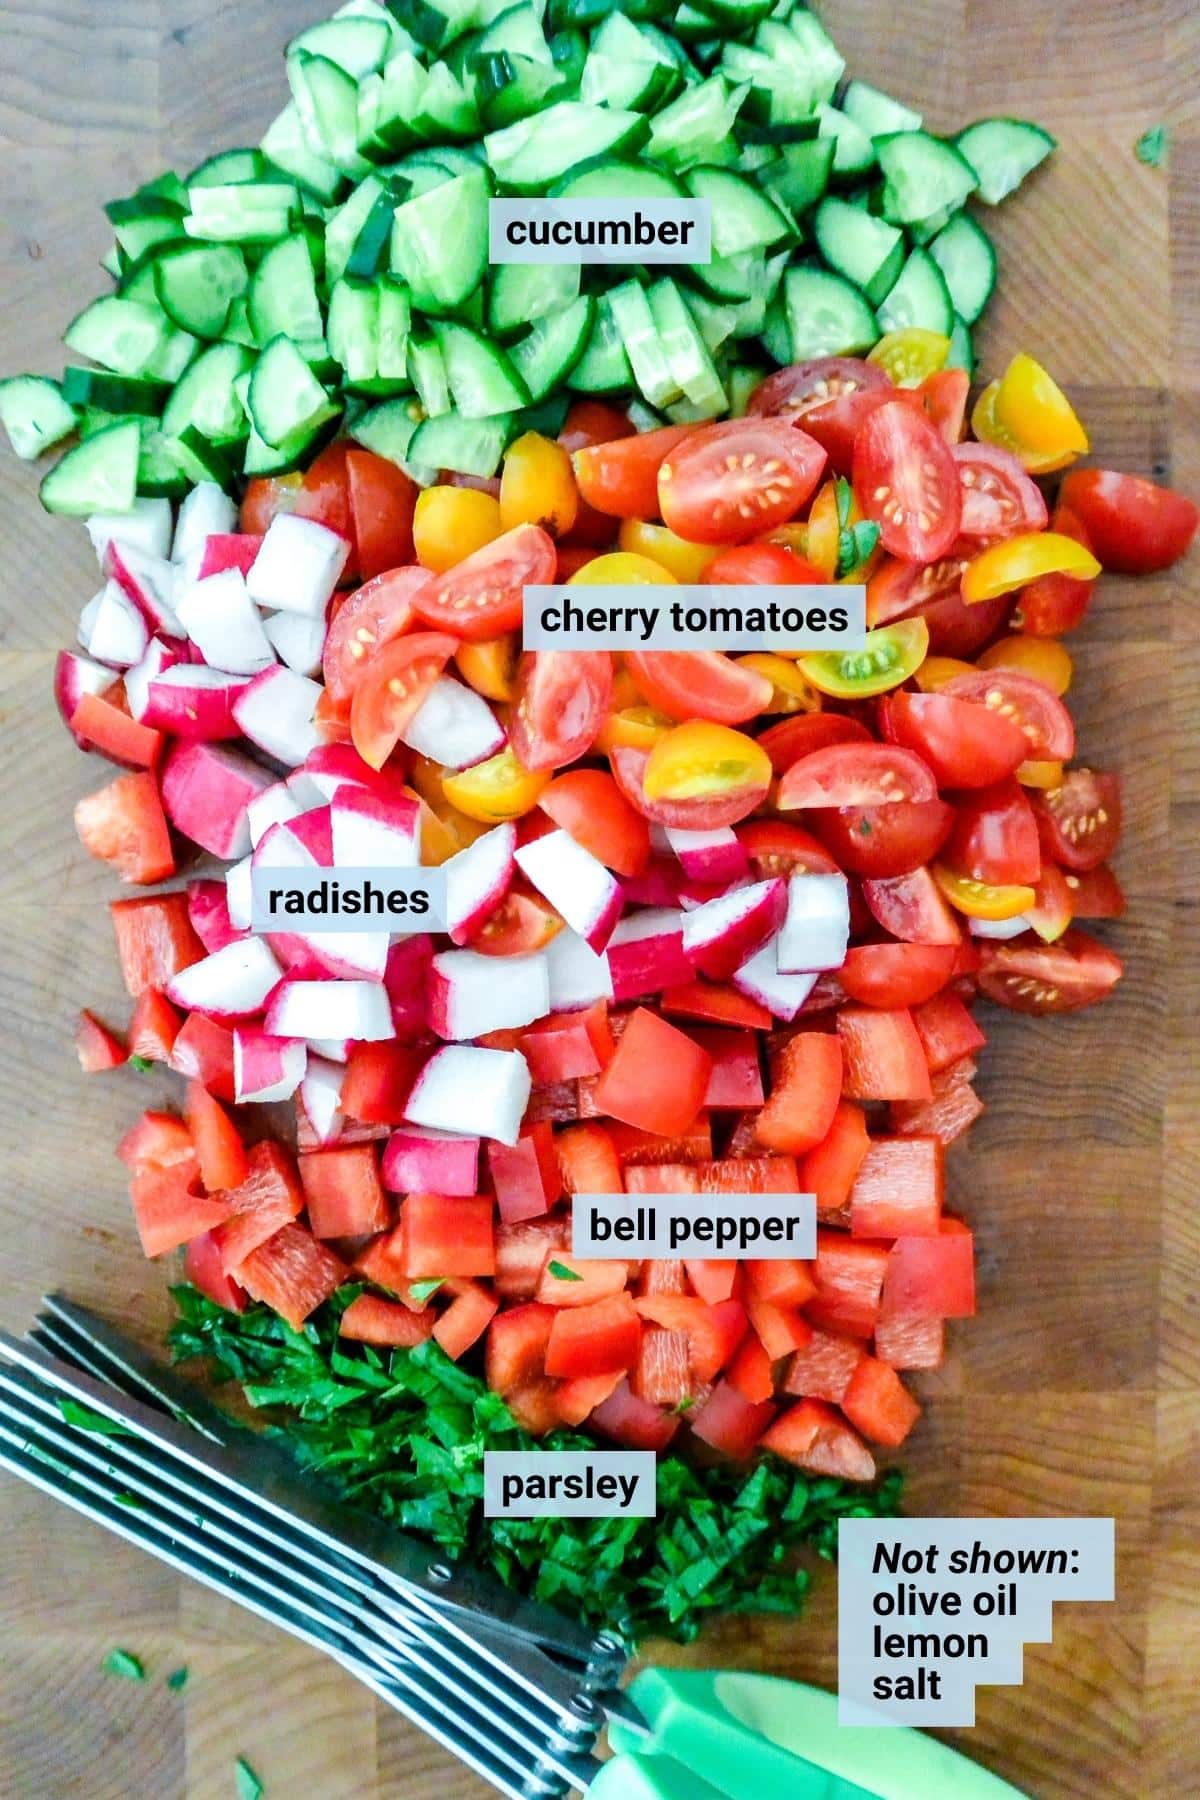 Diced cucumbers, tomatoes, radishes, bell peppers, and chopped parsley with an herb scissors on a cutting board.